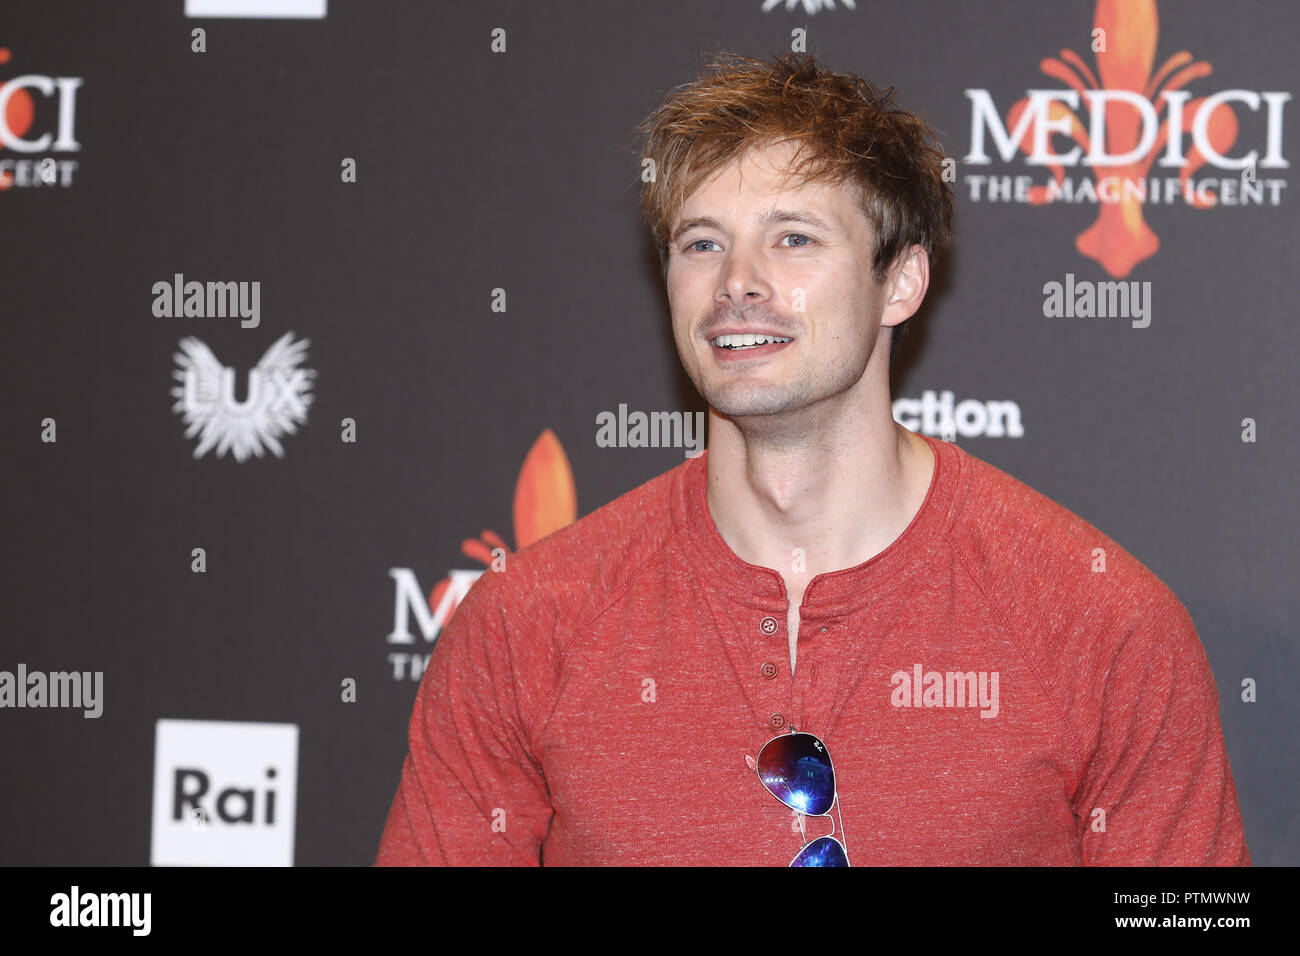 Florence, Palazzo Medici Riccardi, photocall tv series 'Medici - The Magnificent'. In the picture: Bradley James Stock Photo